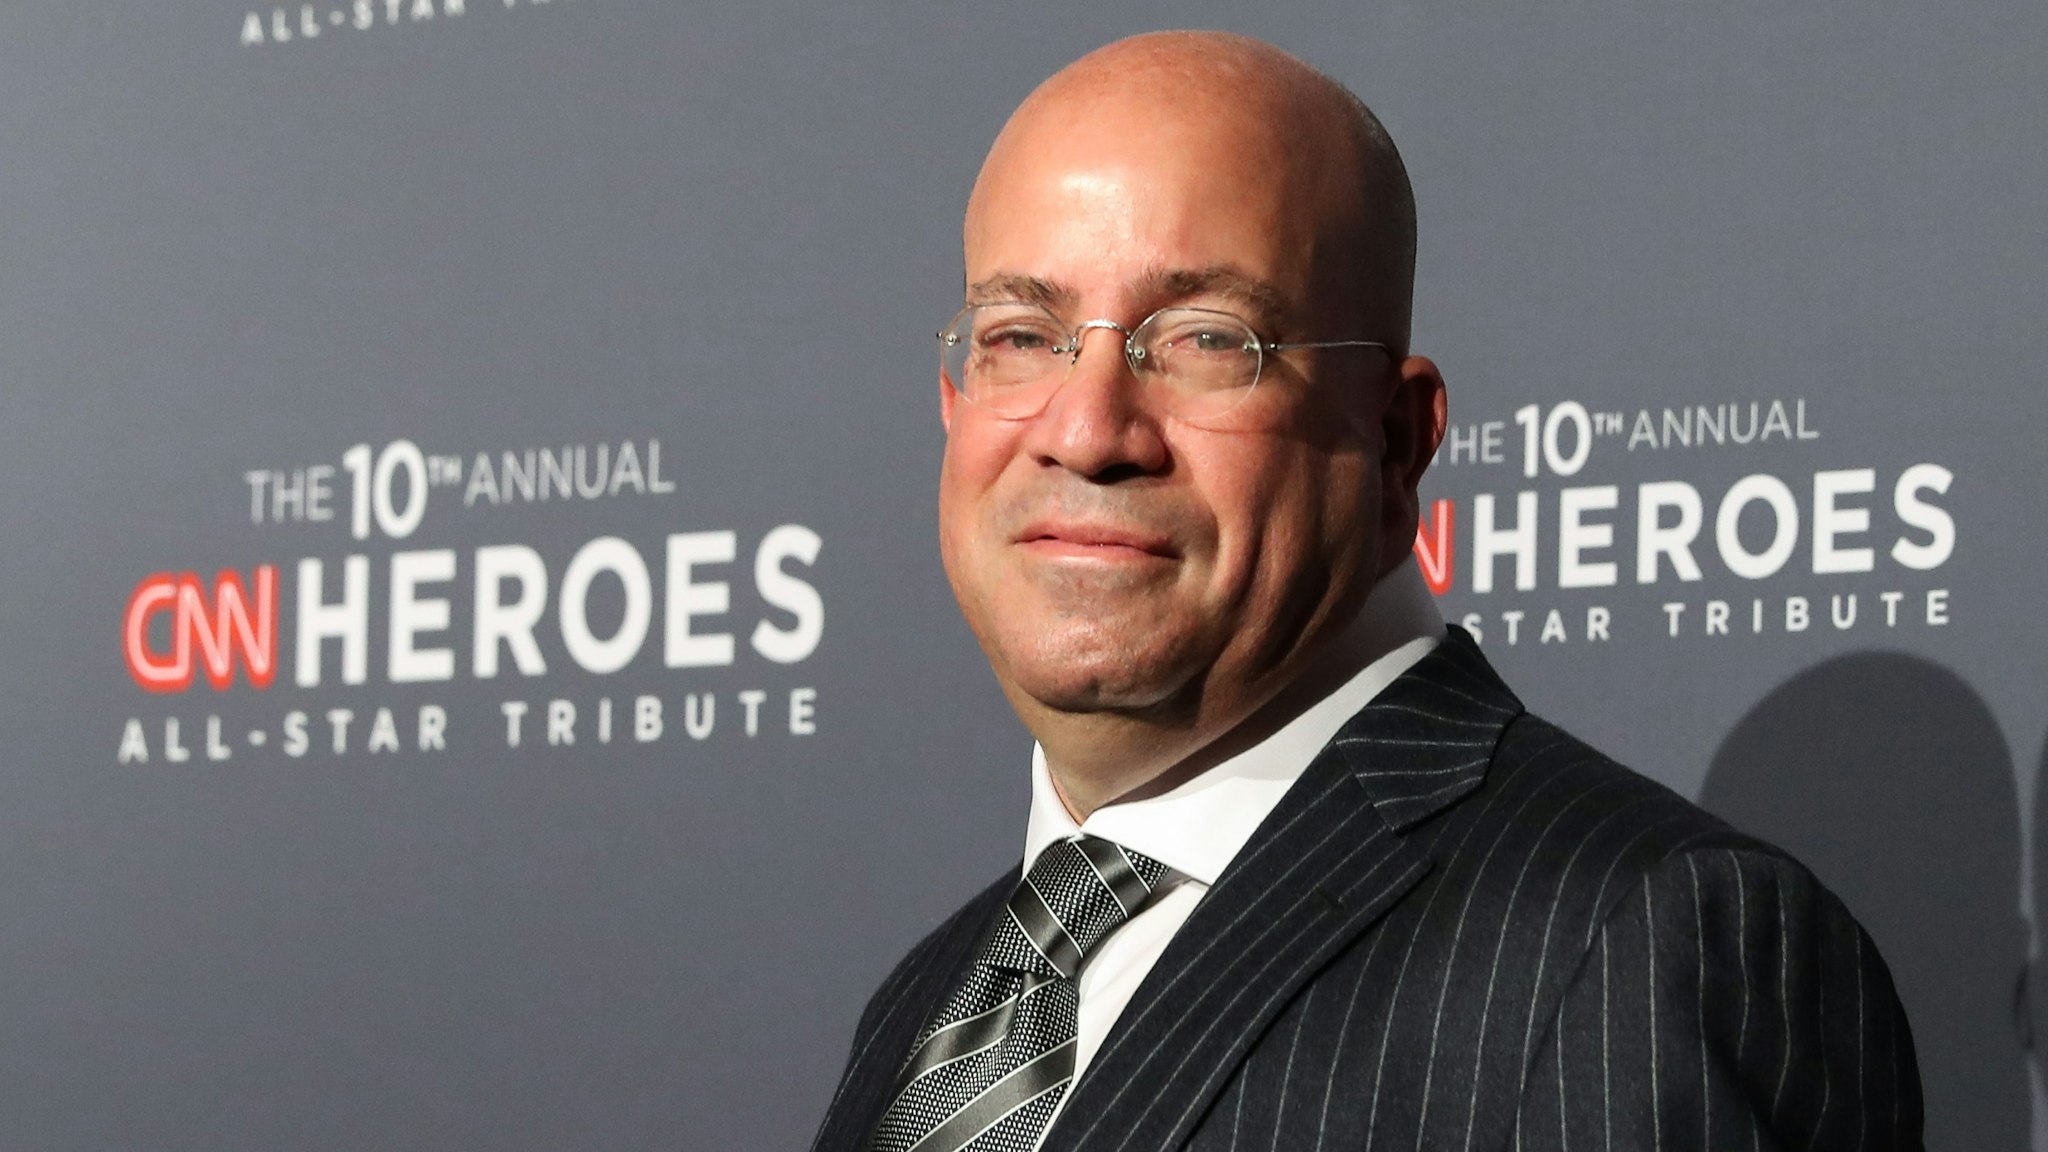 CNN President Jeff Zucker attends the 10th Anniversary CNN Heroes at American Museum of Natural History on December 11, 2016 in New York City.